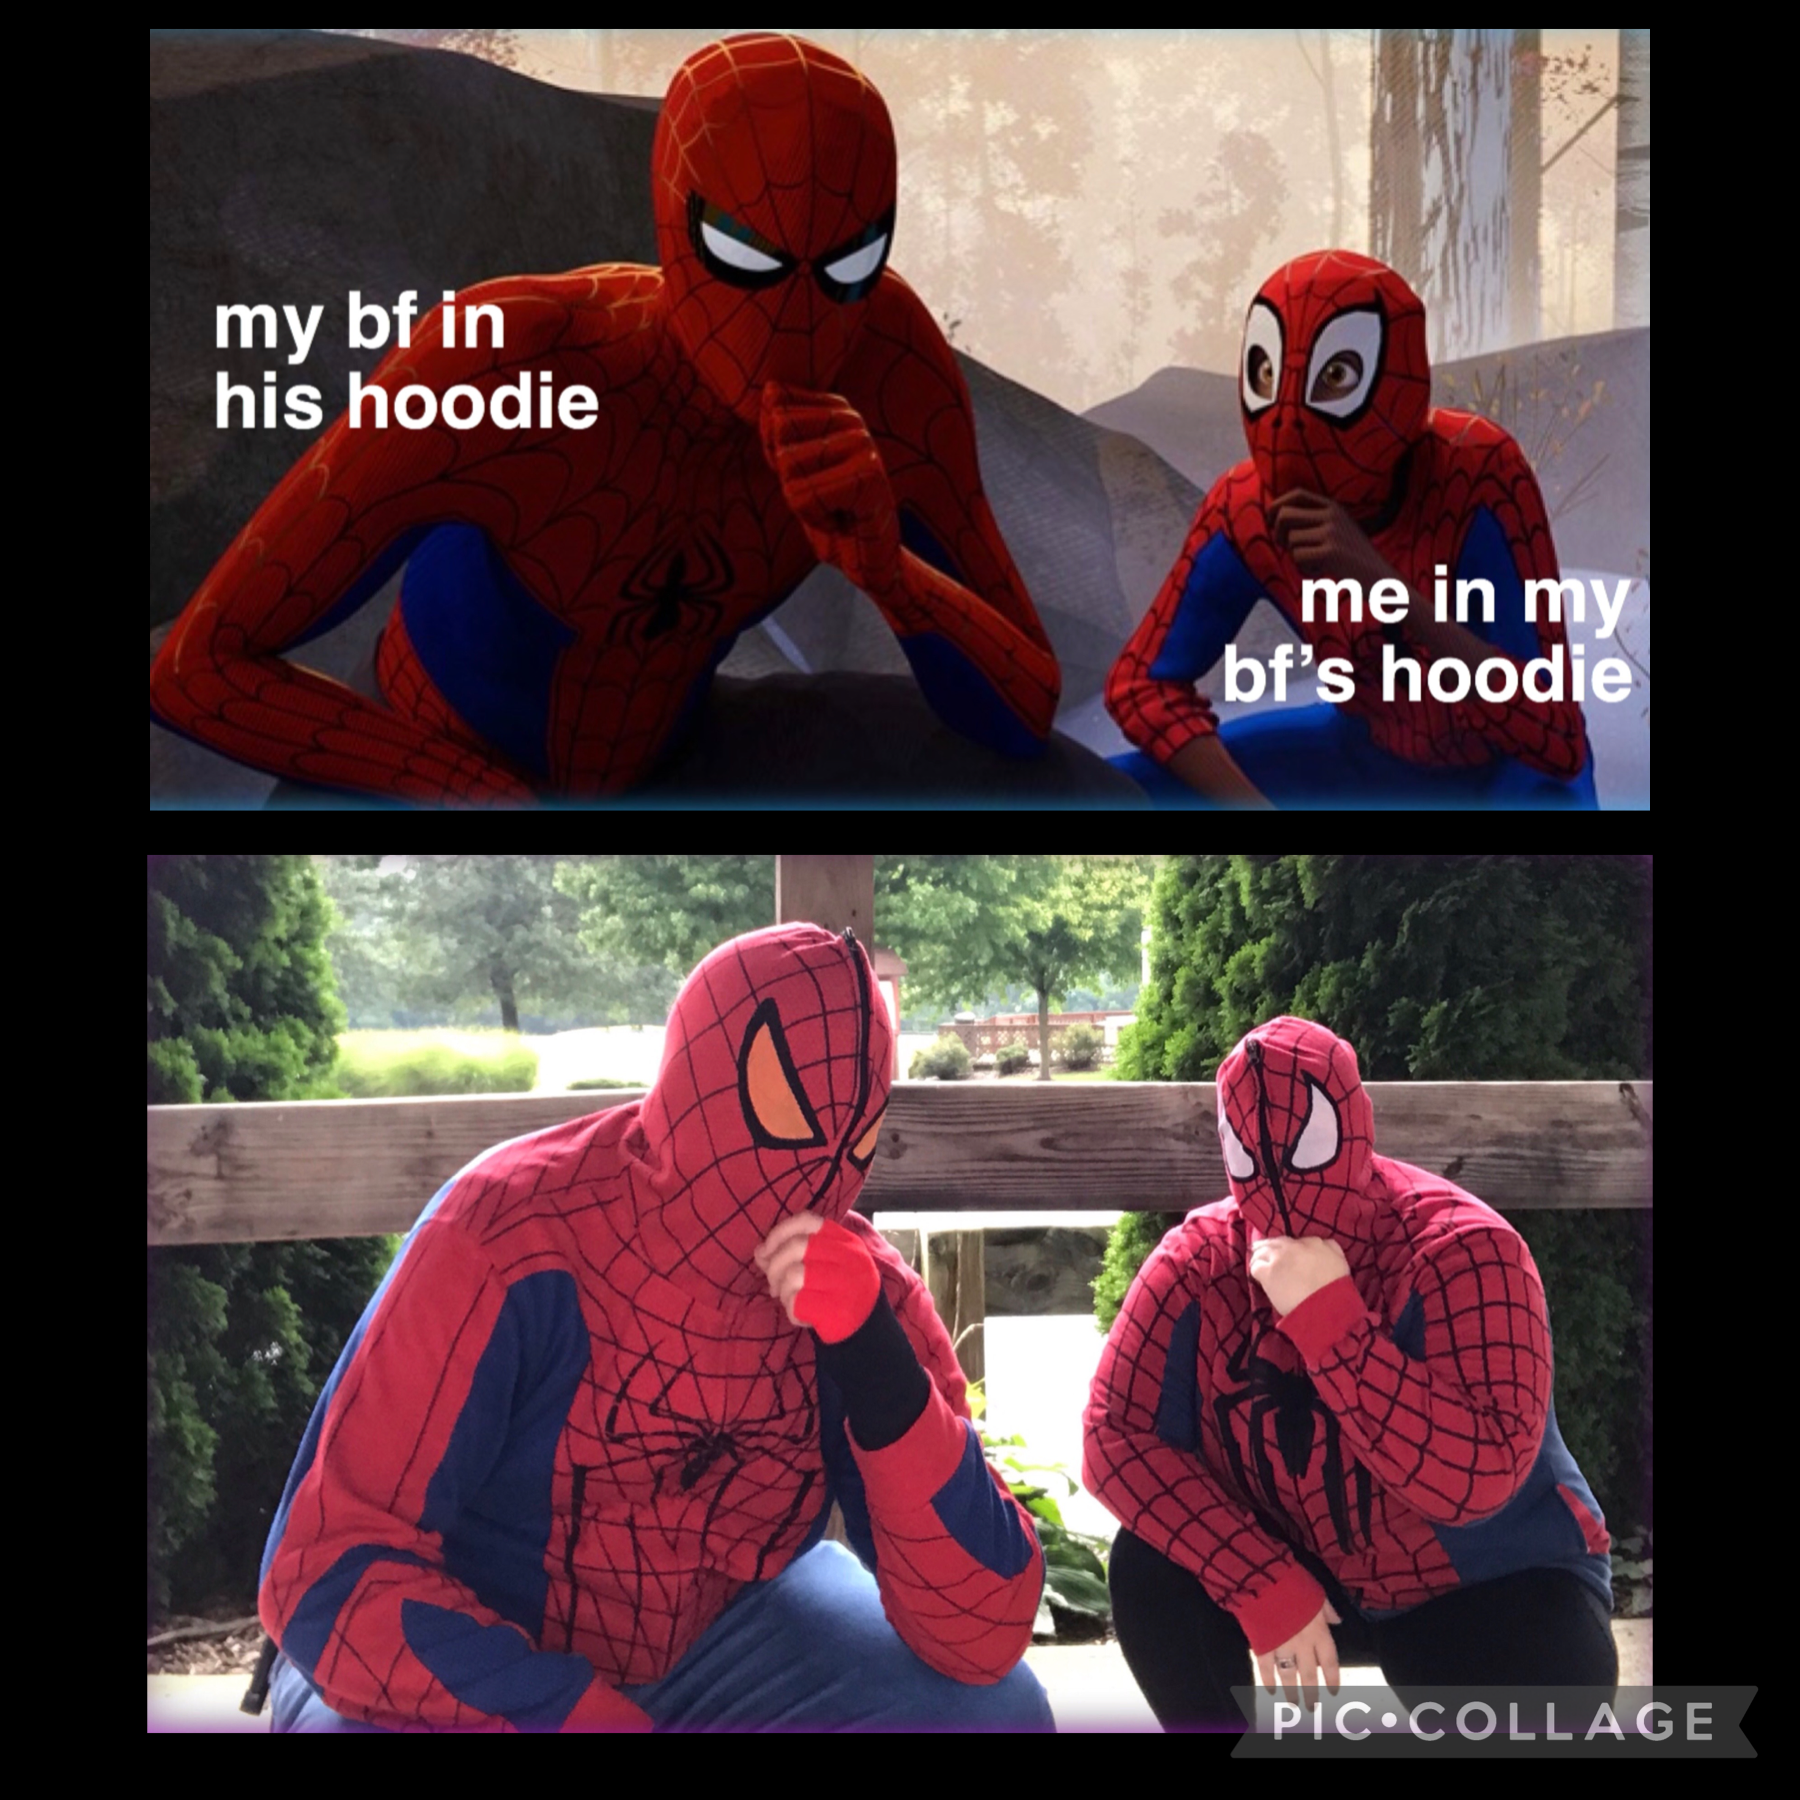 🕸 idk if I was supposed to be able to take this meme quite so literally! But it was quite funny, since my bf has a huge collection of Spider-Man hoodies…